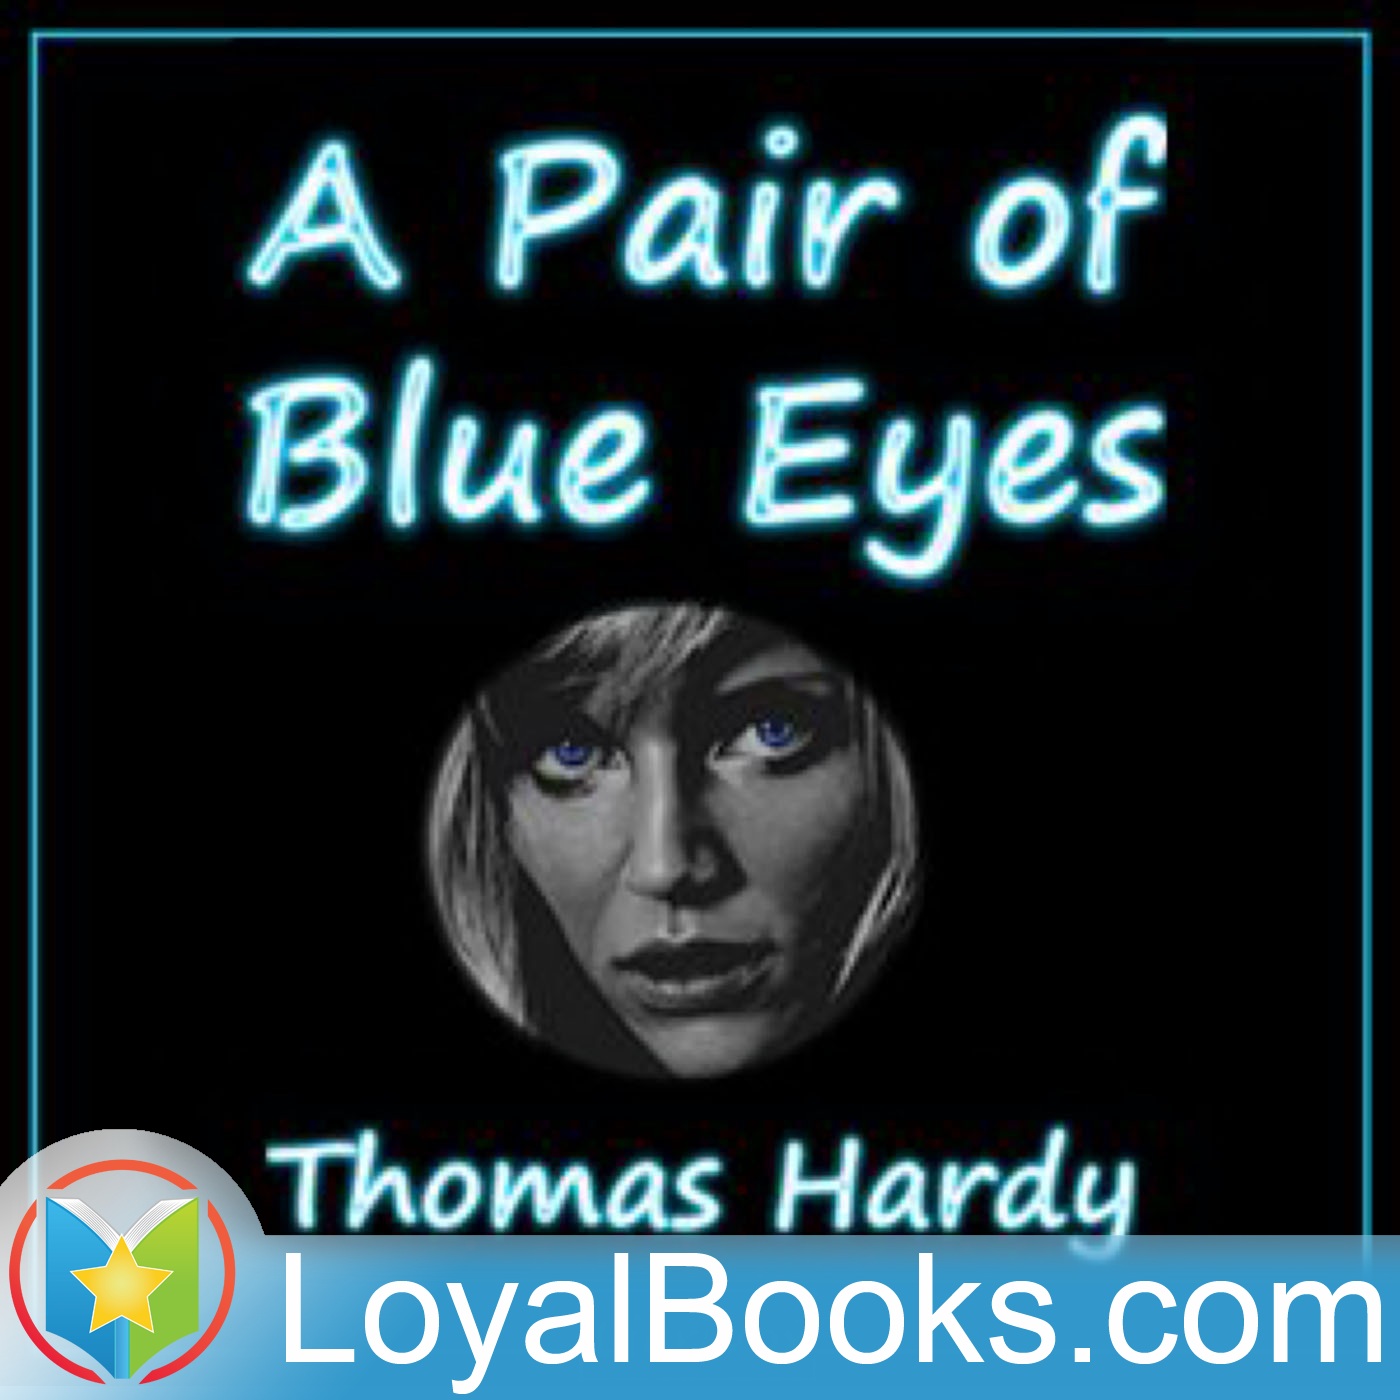 A Pair of Blue Eyes by Thomas Hardy